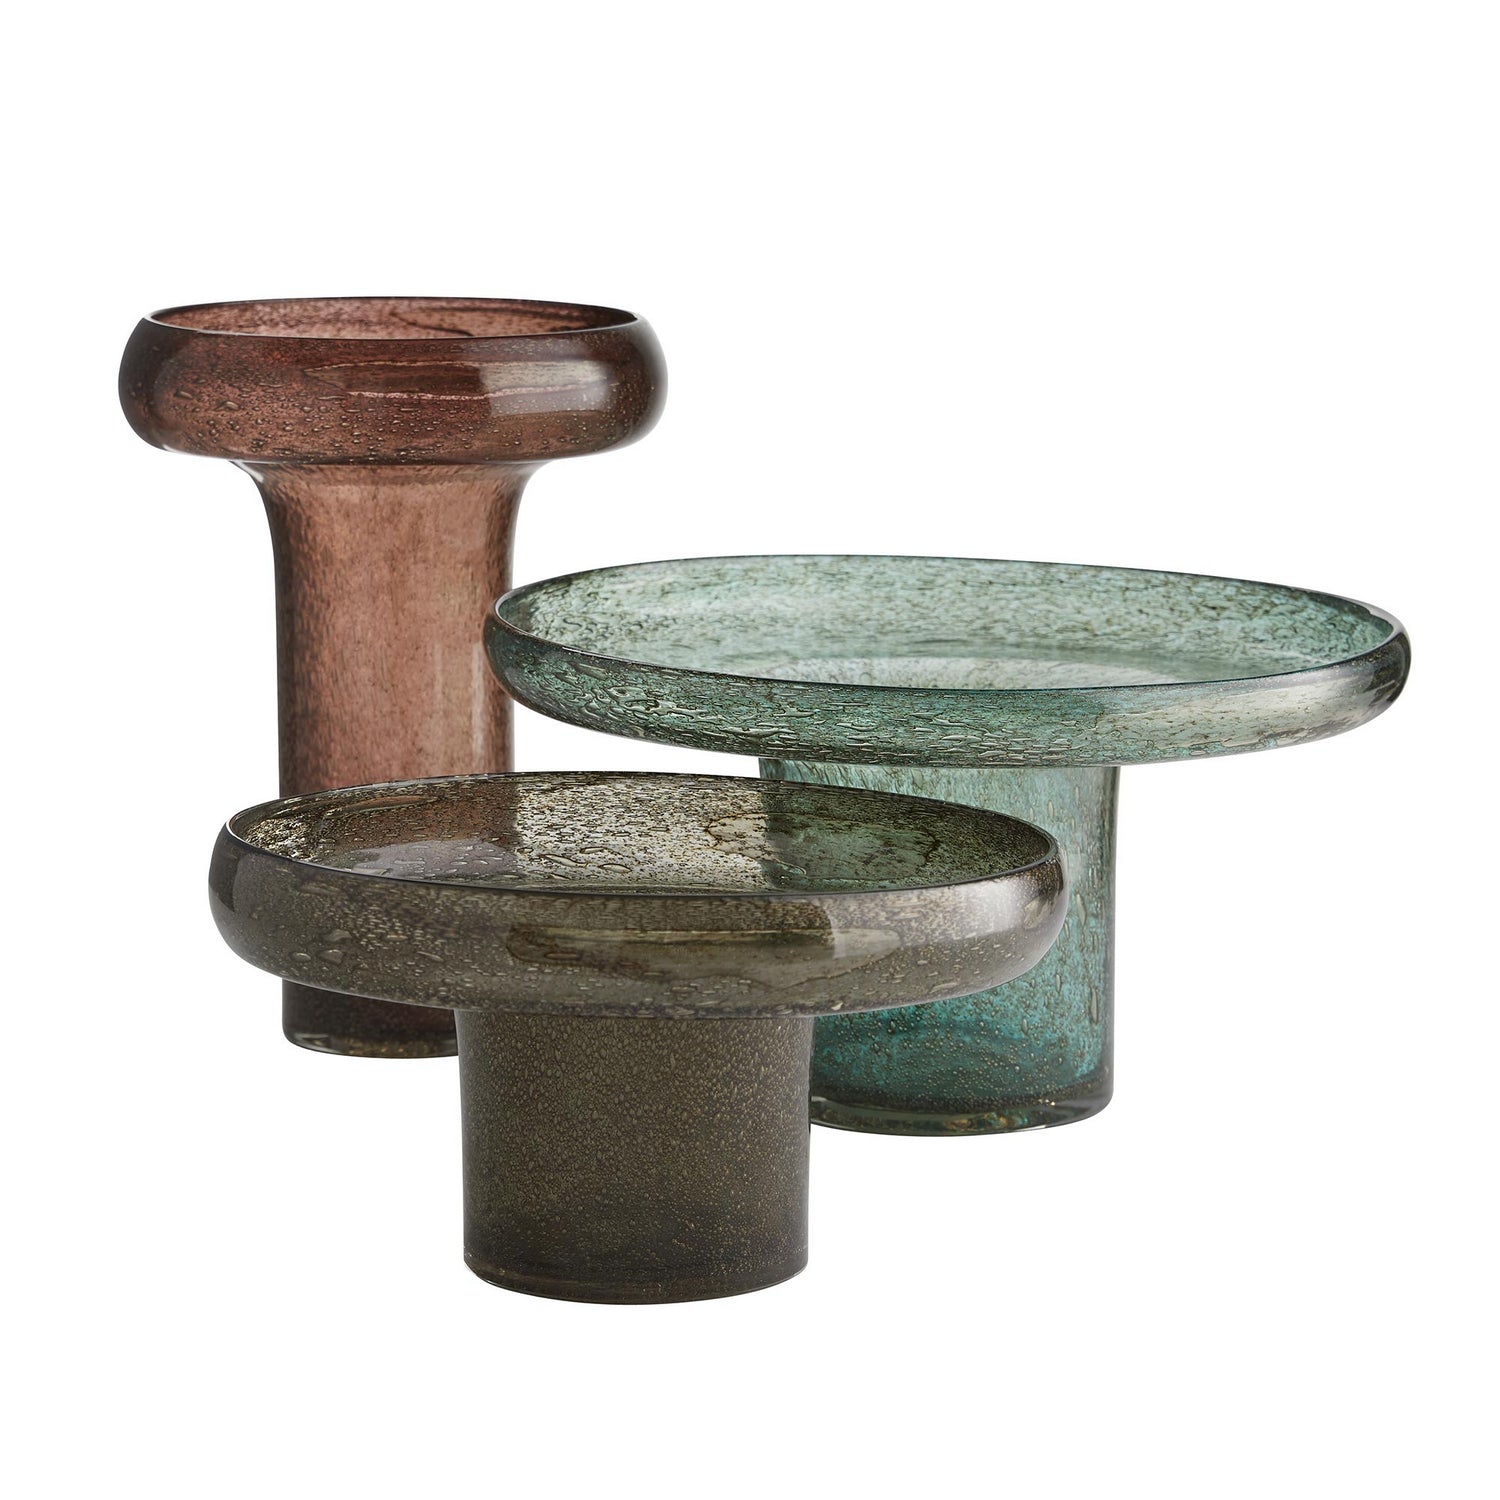 Vases, Set of 3 from the Phoebe collection in Dark Smoke finish